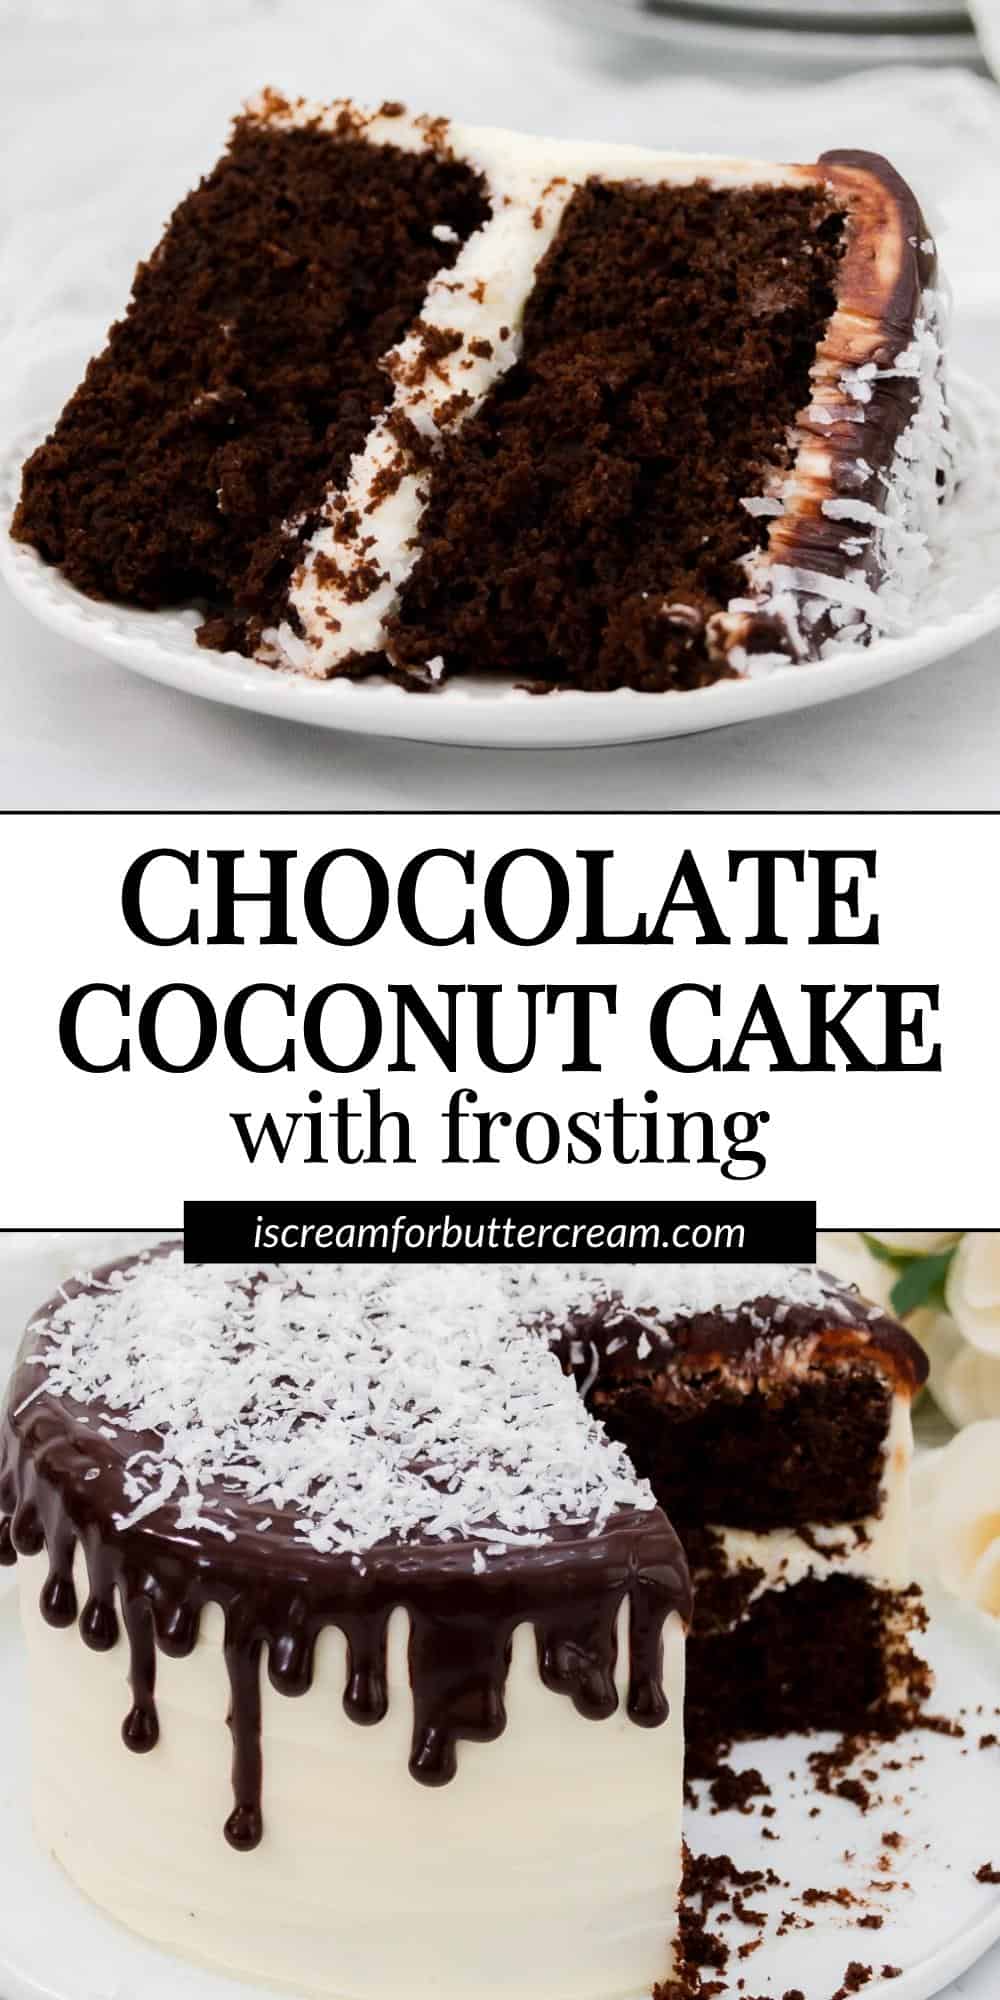 Collage image of two photos of chocolate cake with coconut and text overlay for a pin graphic.